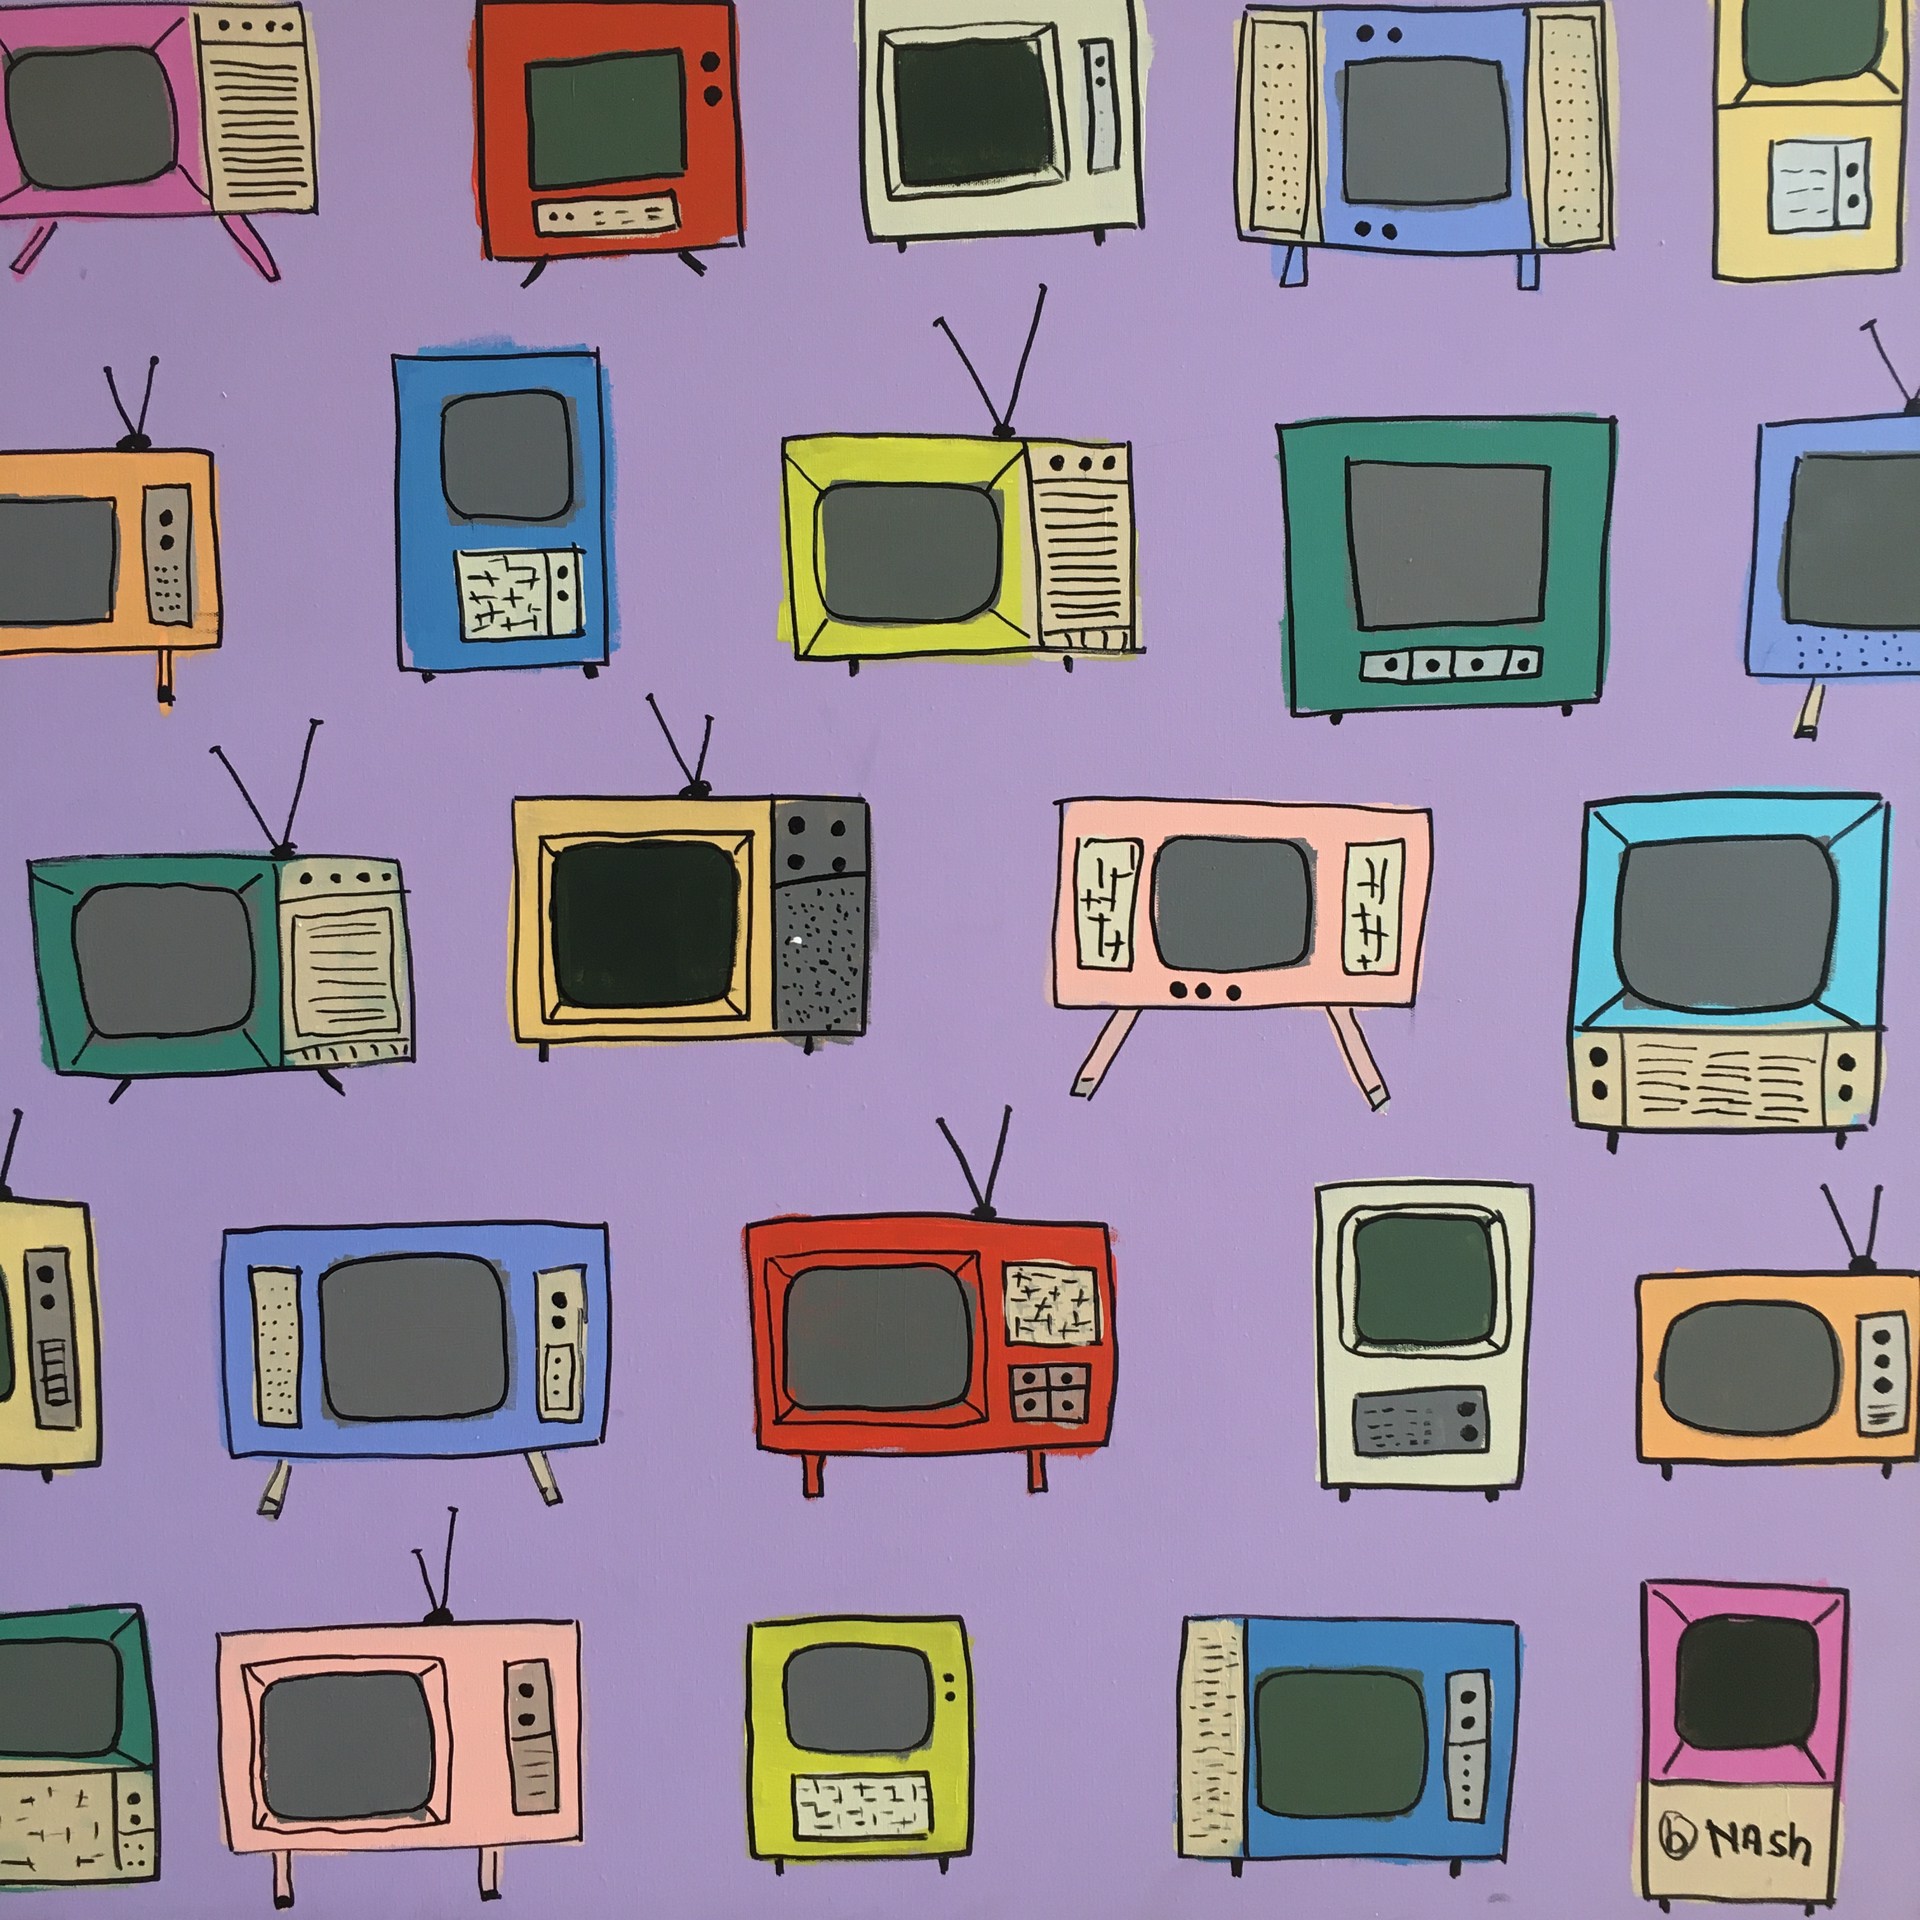 There's Never Anything on TV by Brian Nash